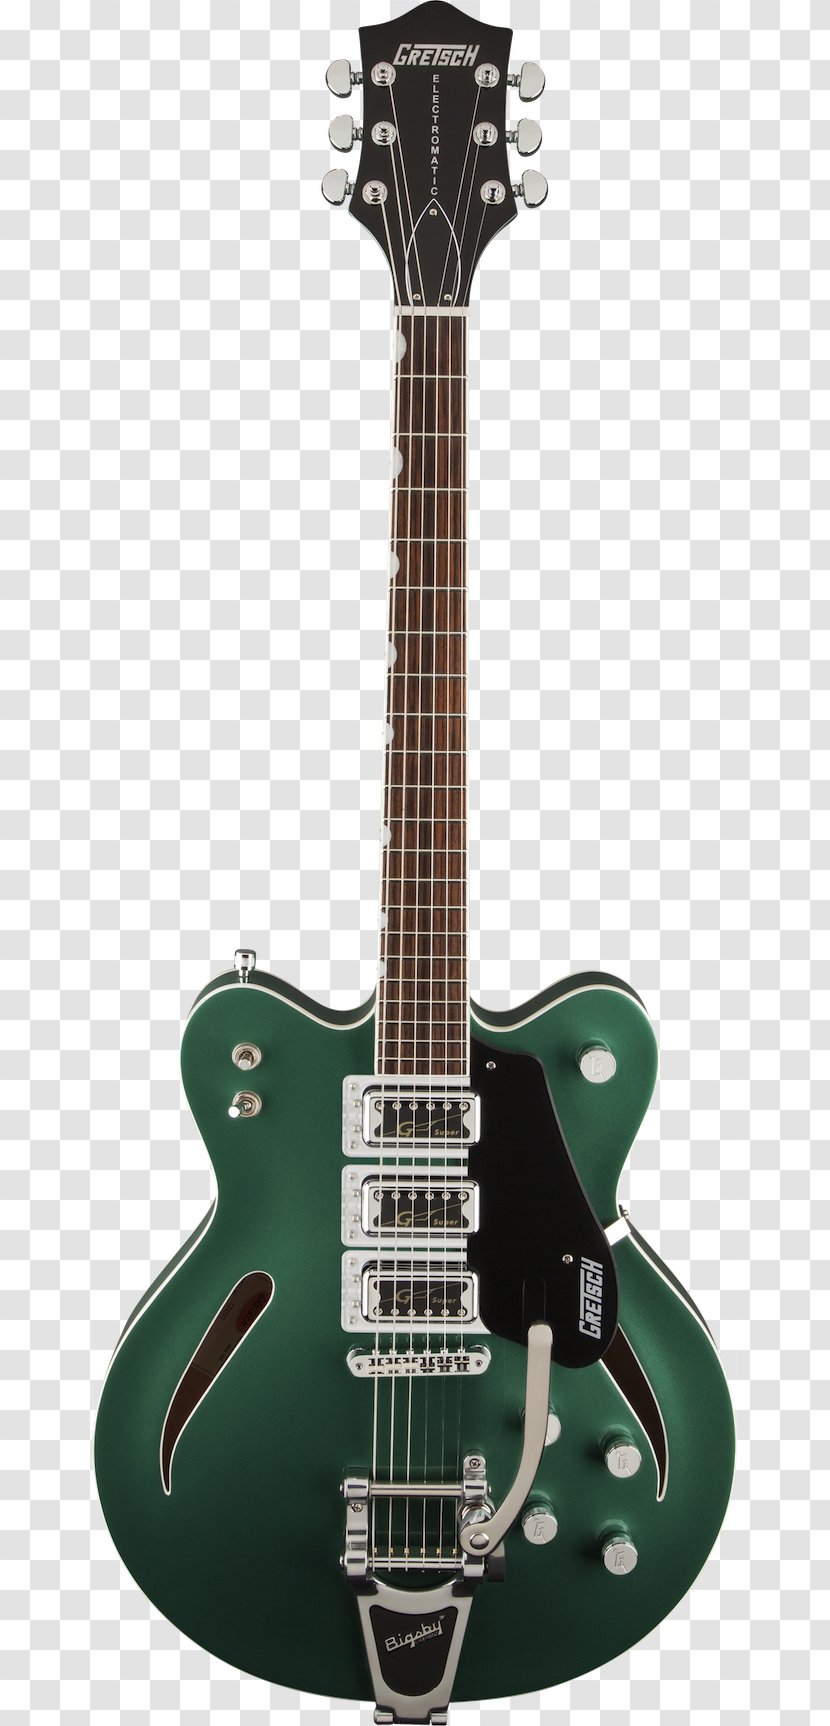 Gretsch G5622T-CB Electromatic Electric Guitar G5620T-CB - Flower - Green Drums Transparent PNG